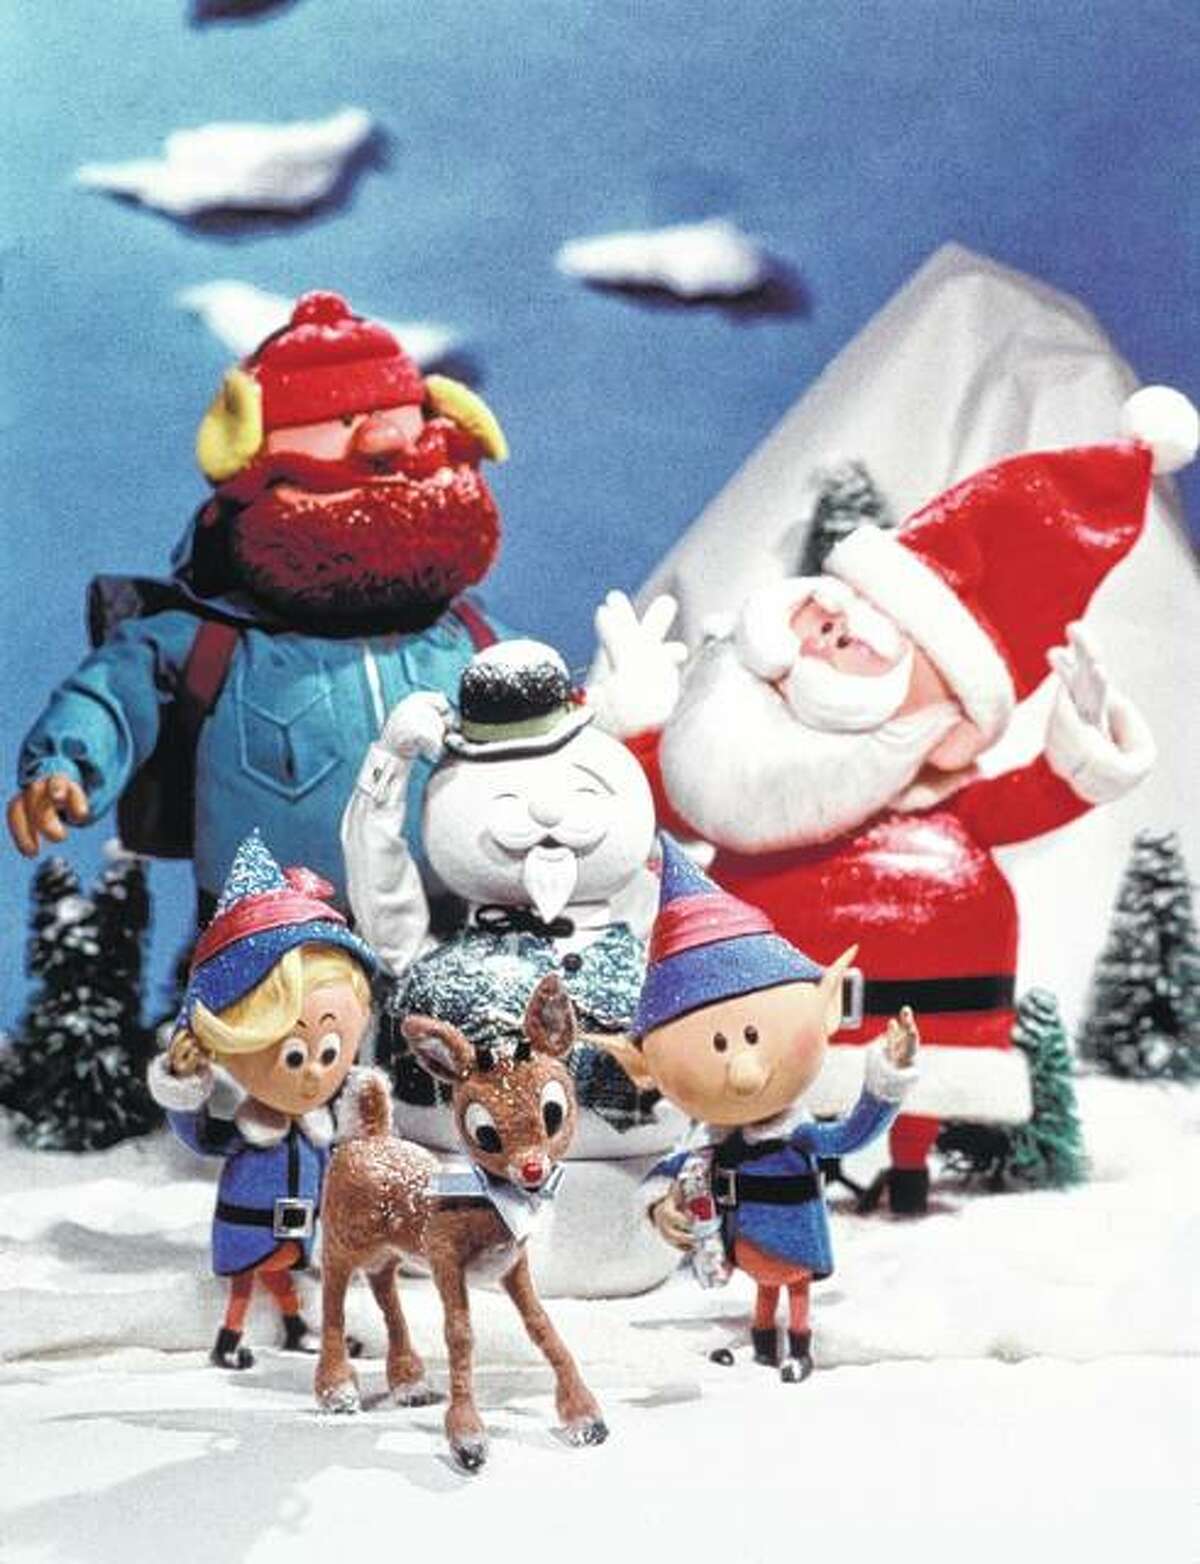 Hermey (from left), Rudolph, Head Elf, Yukon Cornelius, Sam the Snowman and Santa Claus are the main characters of the beloved Christmas classic “Rudolph the Red-nosed Reindeer.”